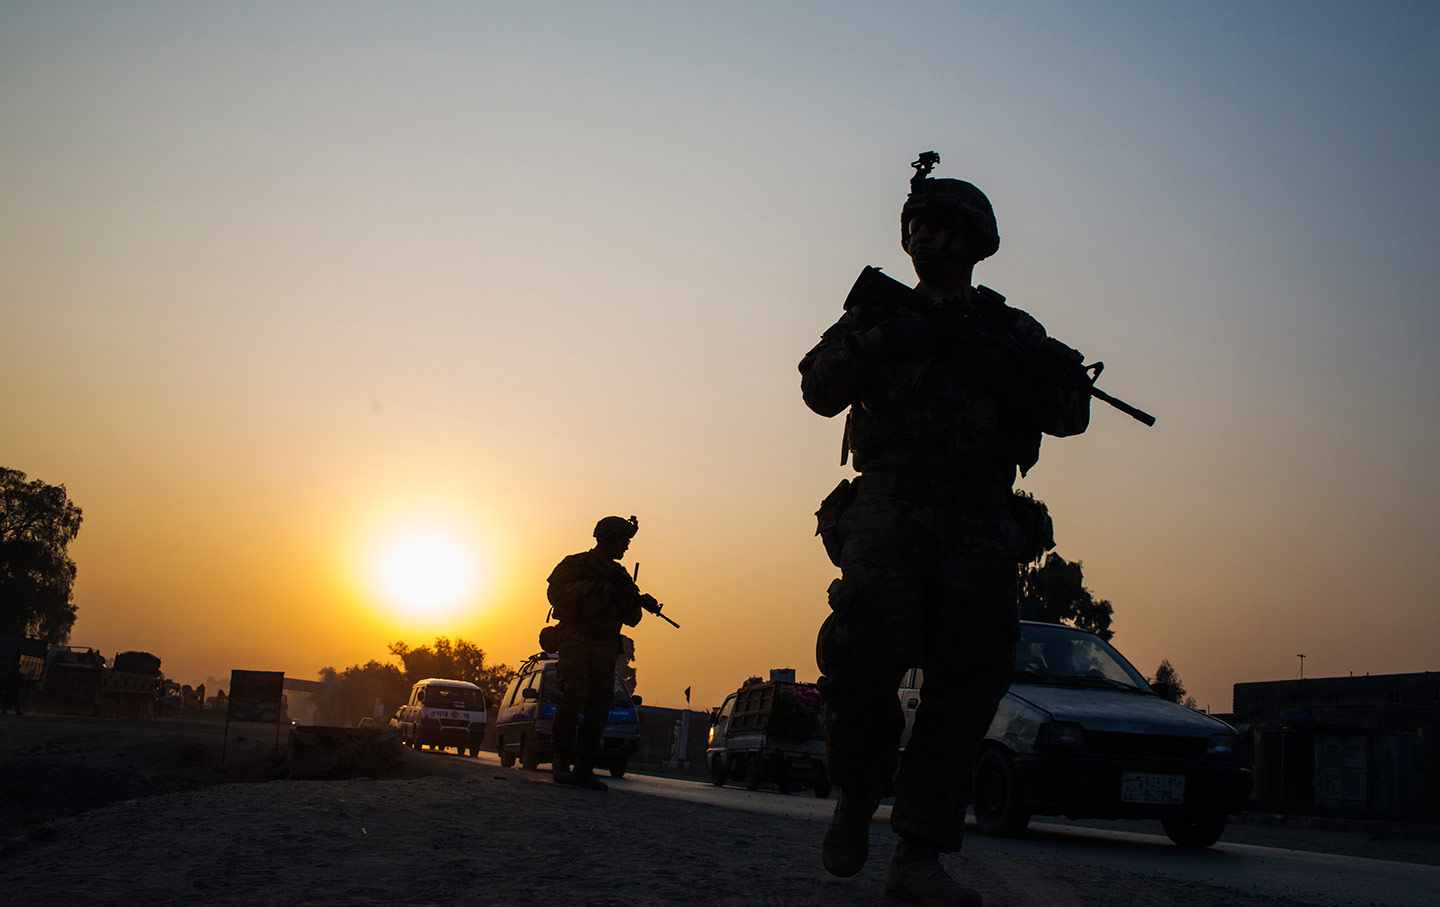 chasing peace in afghanistan